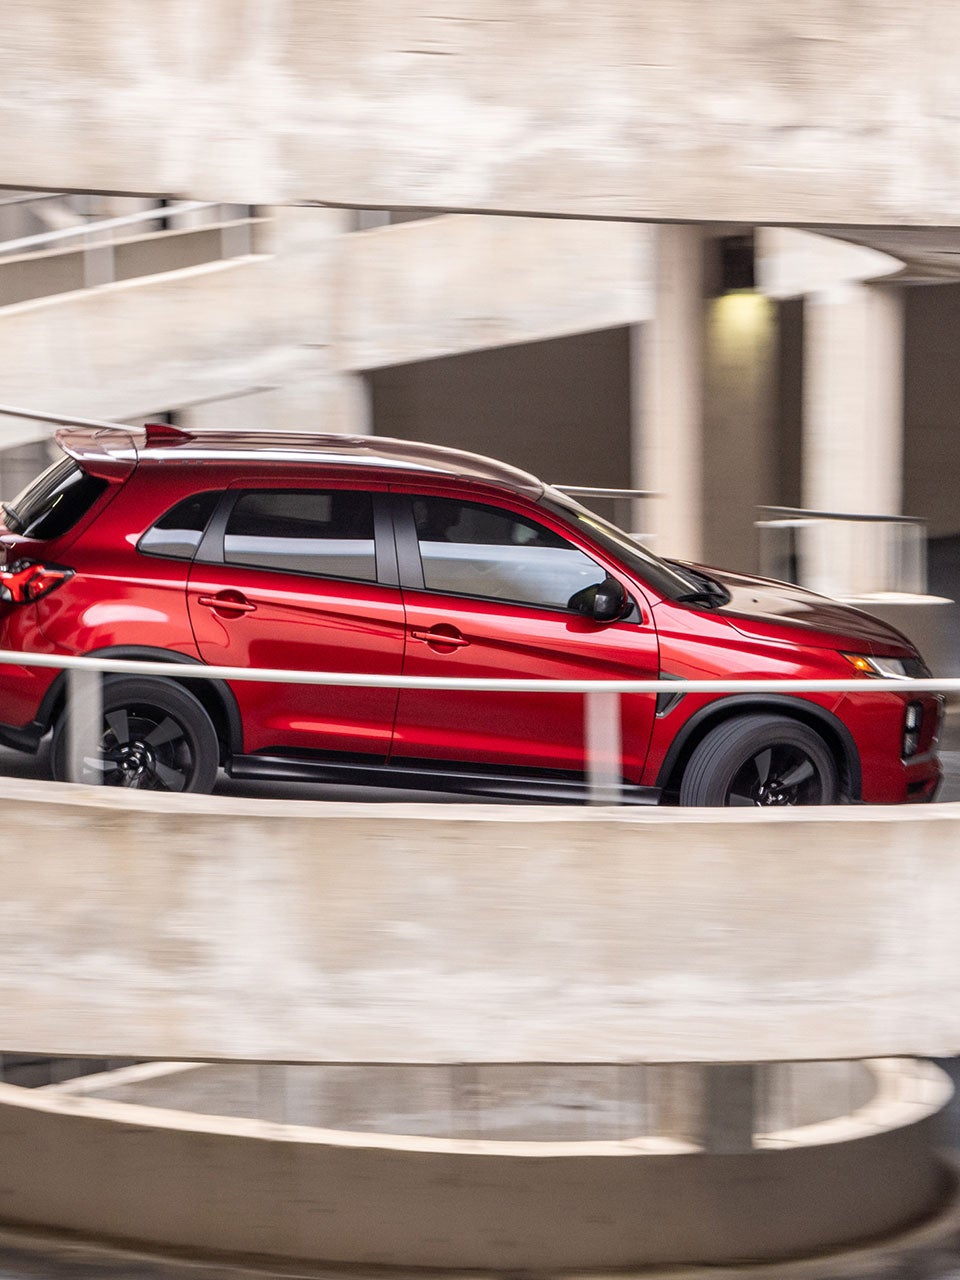 2020 Mitsubishi Outlander Sport Review, Pricing, & Pictures